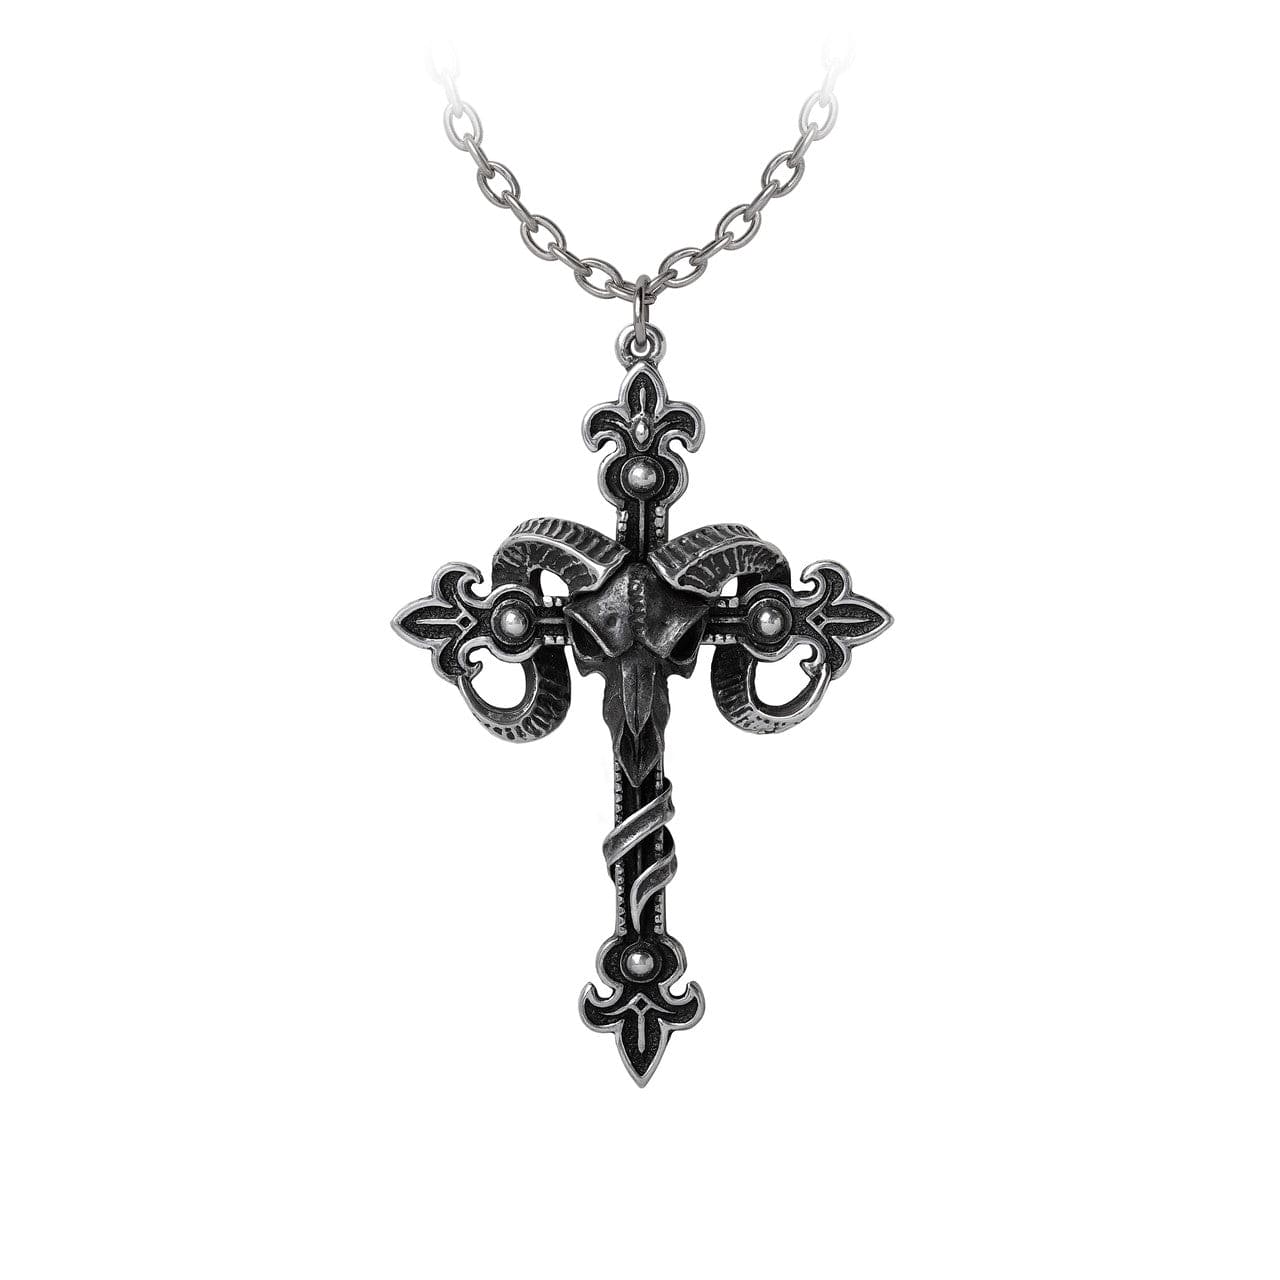 Intricate Cross of Baphomet Scroll Decoration Necklace